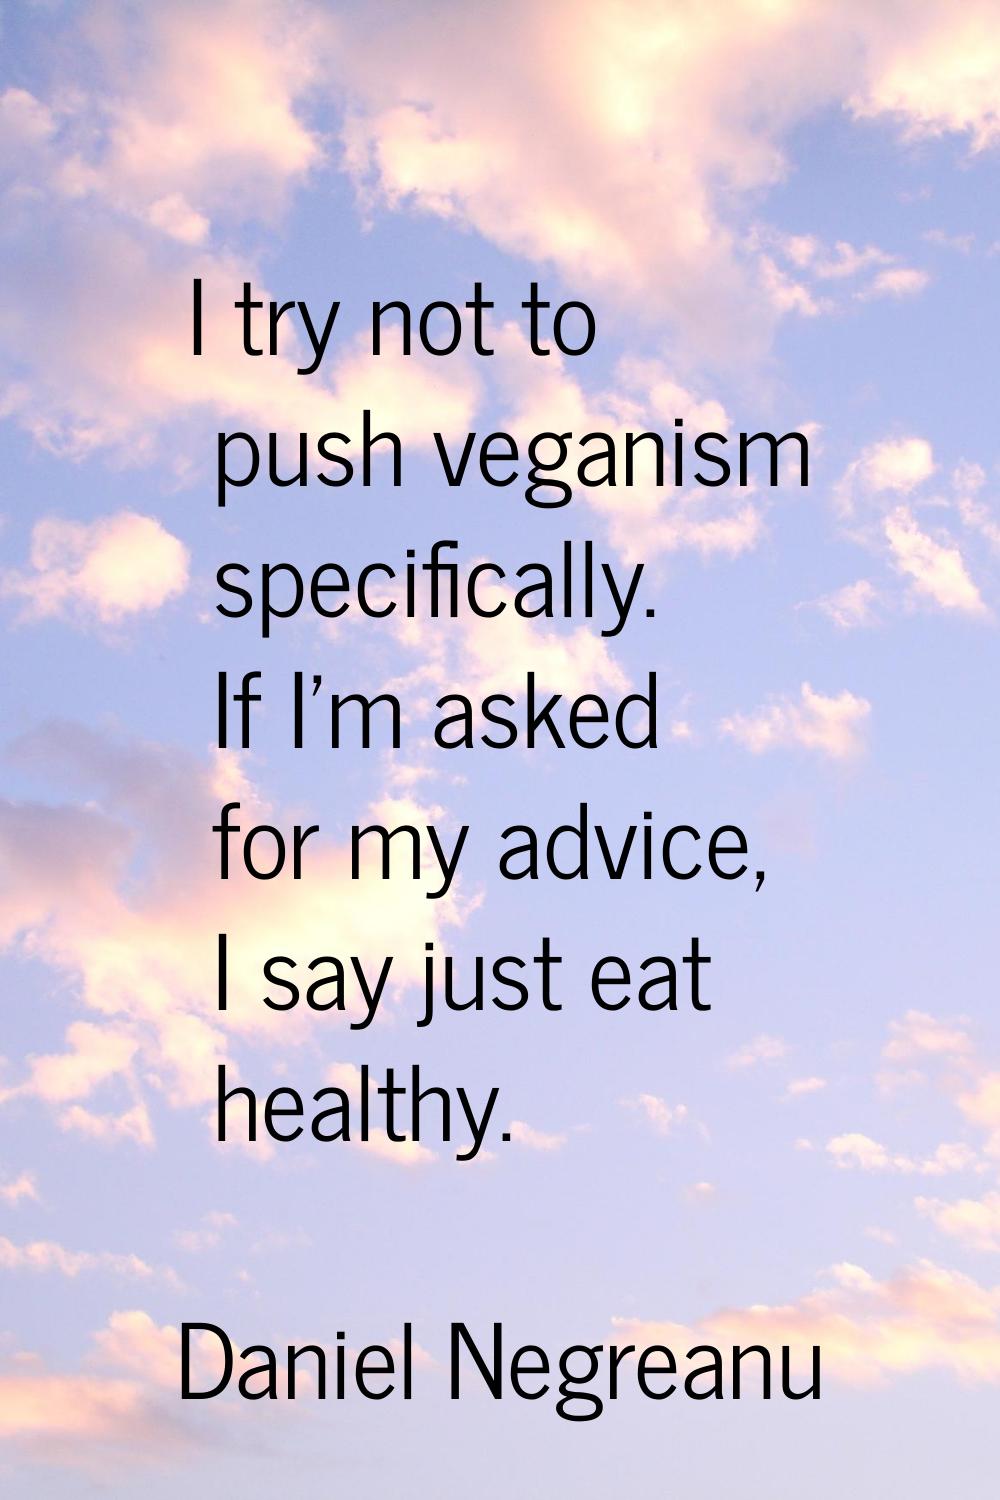 I try not to push veganism specifically. If I'm asked for my advice, I say just eat healthy.